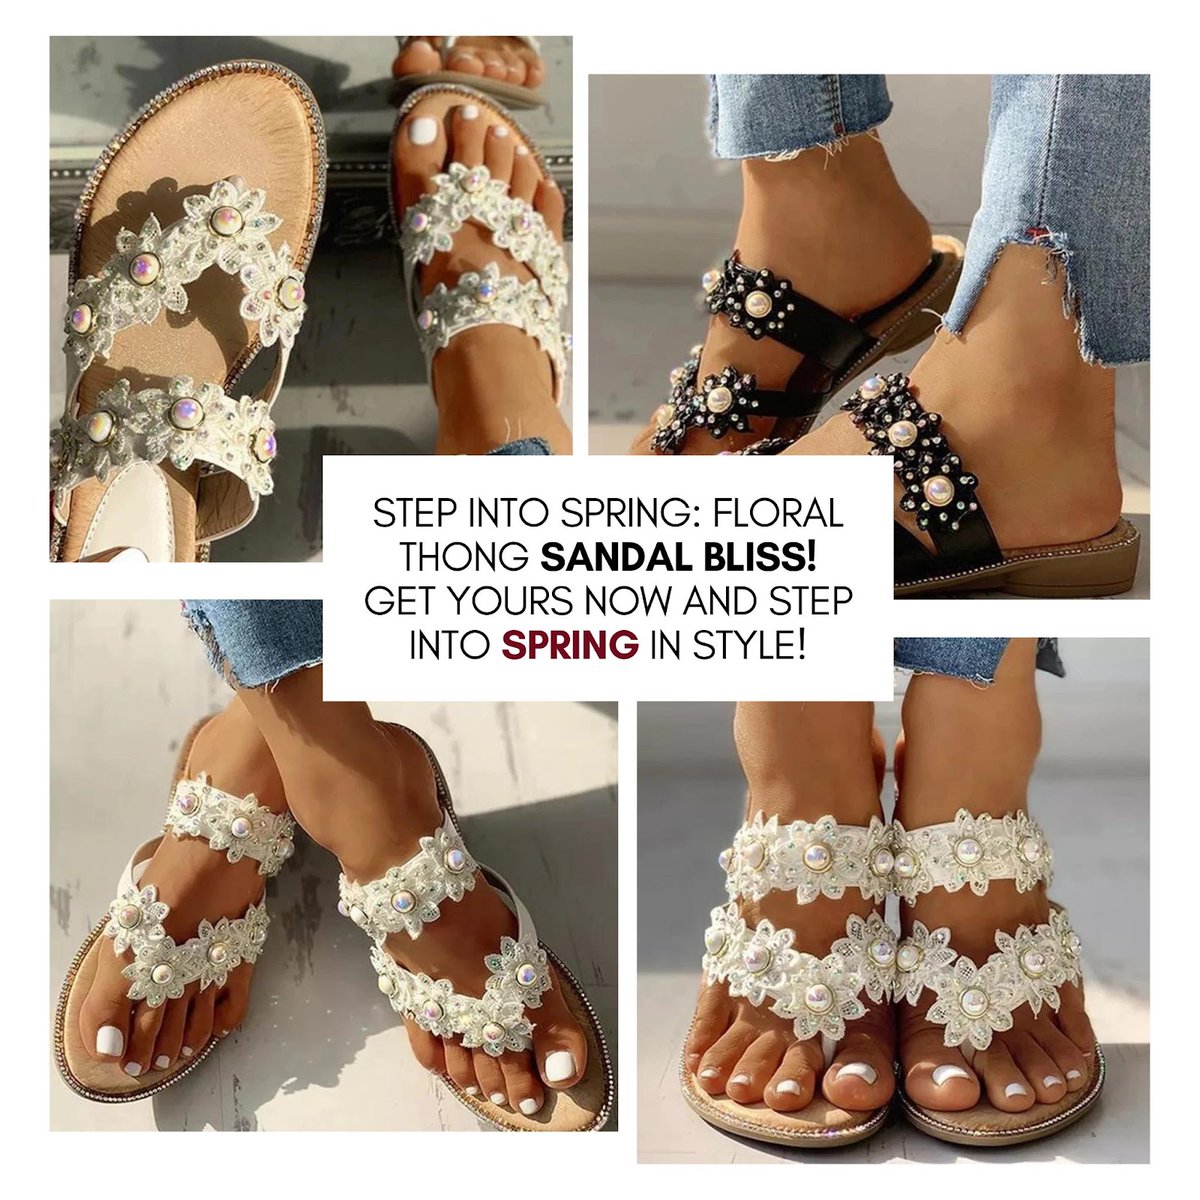 Embrace the season with our Flat Flower Thong Sandals! 🌟 Effortlessly chic and comfortable, these sandals add a touch of floral elegance to any outfit. Get yours now and step into spring in style! 👡 . #sandals #floral #spring #fashion #style #chic #footwear